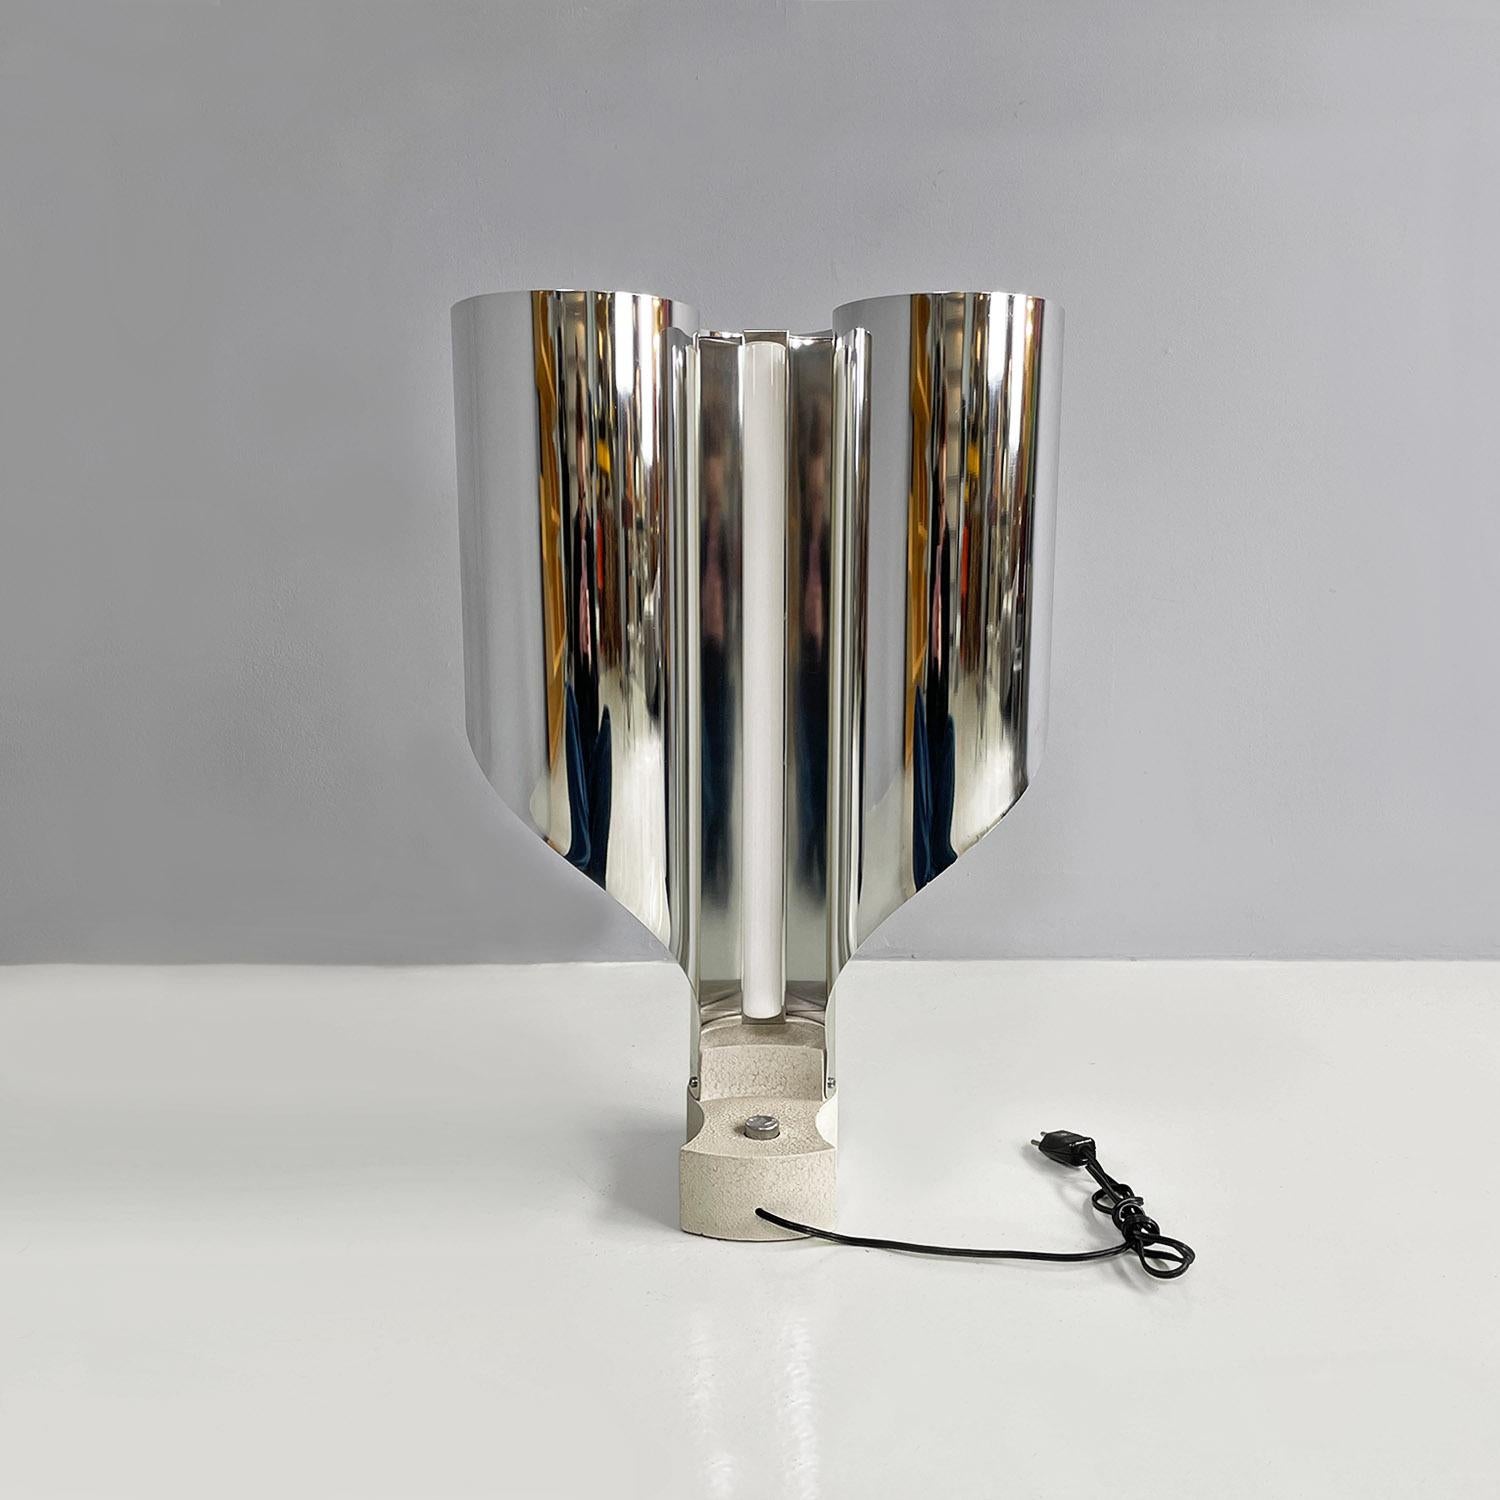 Spinnaker table lamp in chromed and painted metal by Corsini & Wiskemann for Stilnovo
Table lamp with metal base with crackle finish and chromed metal structure and sail lampshade, in curved aluminum sheet. Equipped with three lamp holders and